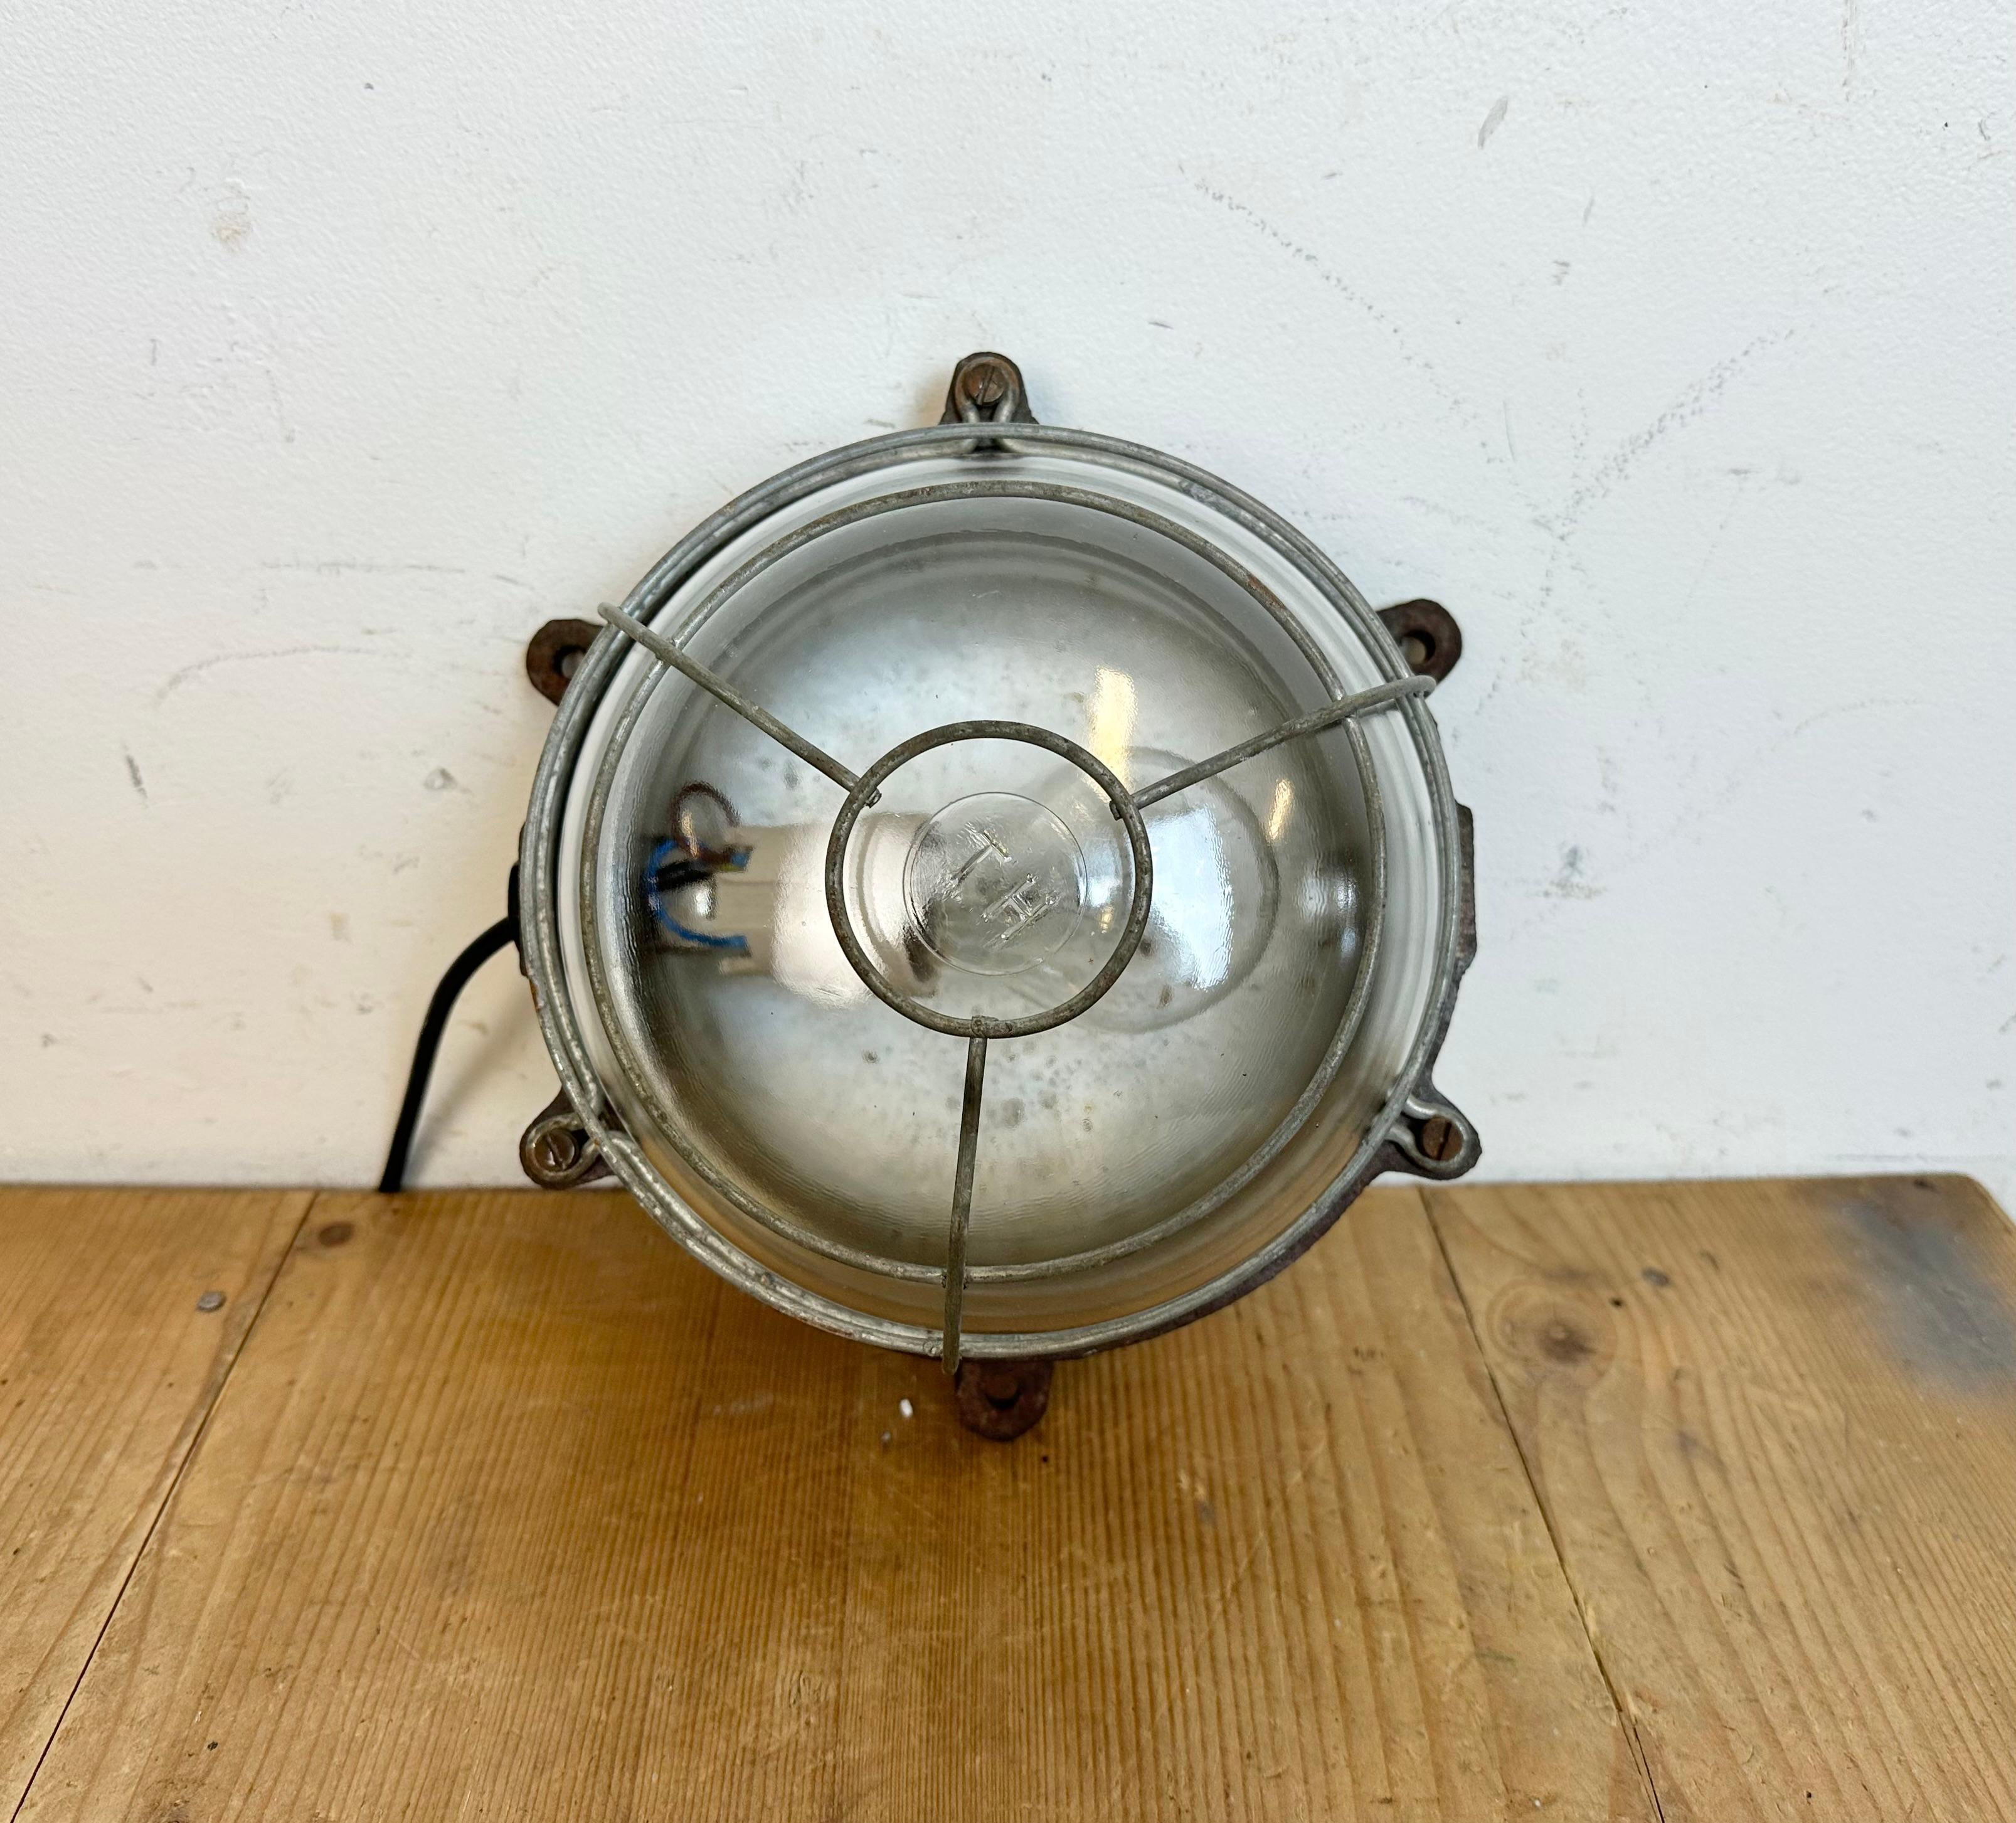 Industrial wall light made in France during the 1950s. Embossed TH brand .It features a cast iron body, a clear glass cover and a steel protectiv grid. The porcelain socket requires standard E 27/ E 26 light bulbs. New wire. The weight of the light